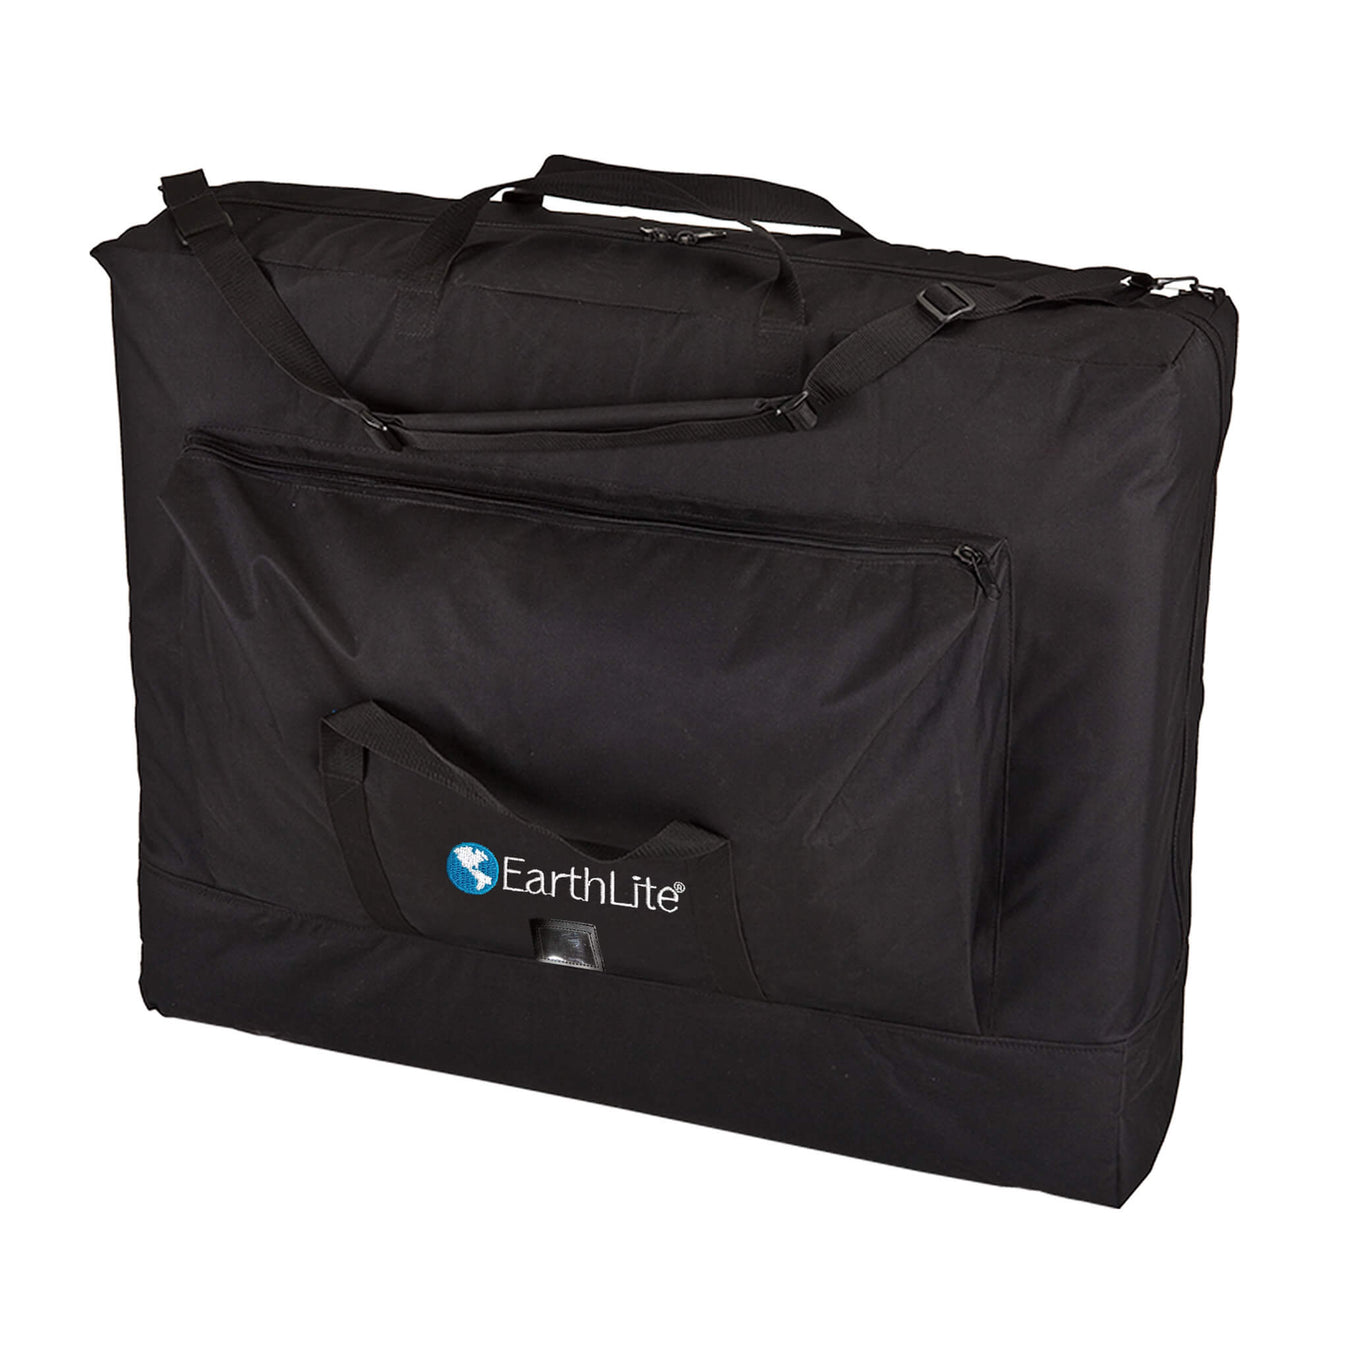 EarthLite Professional Carry Case